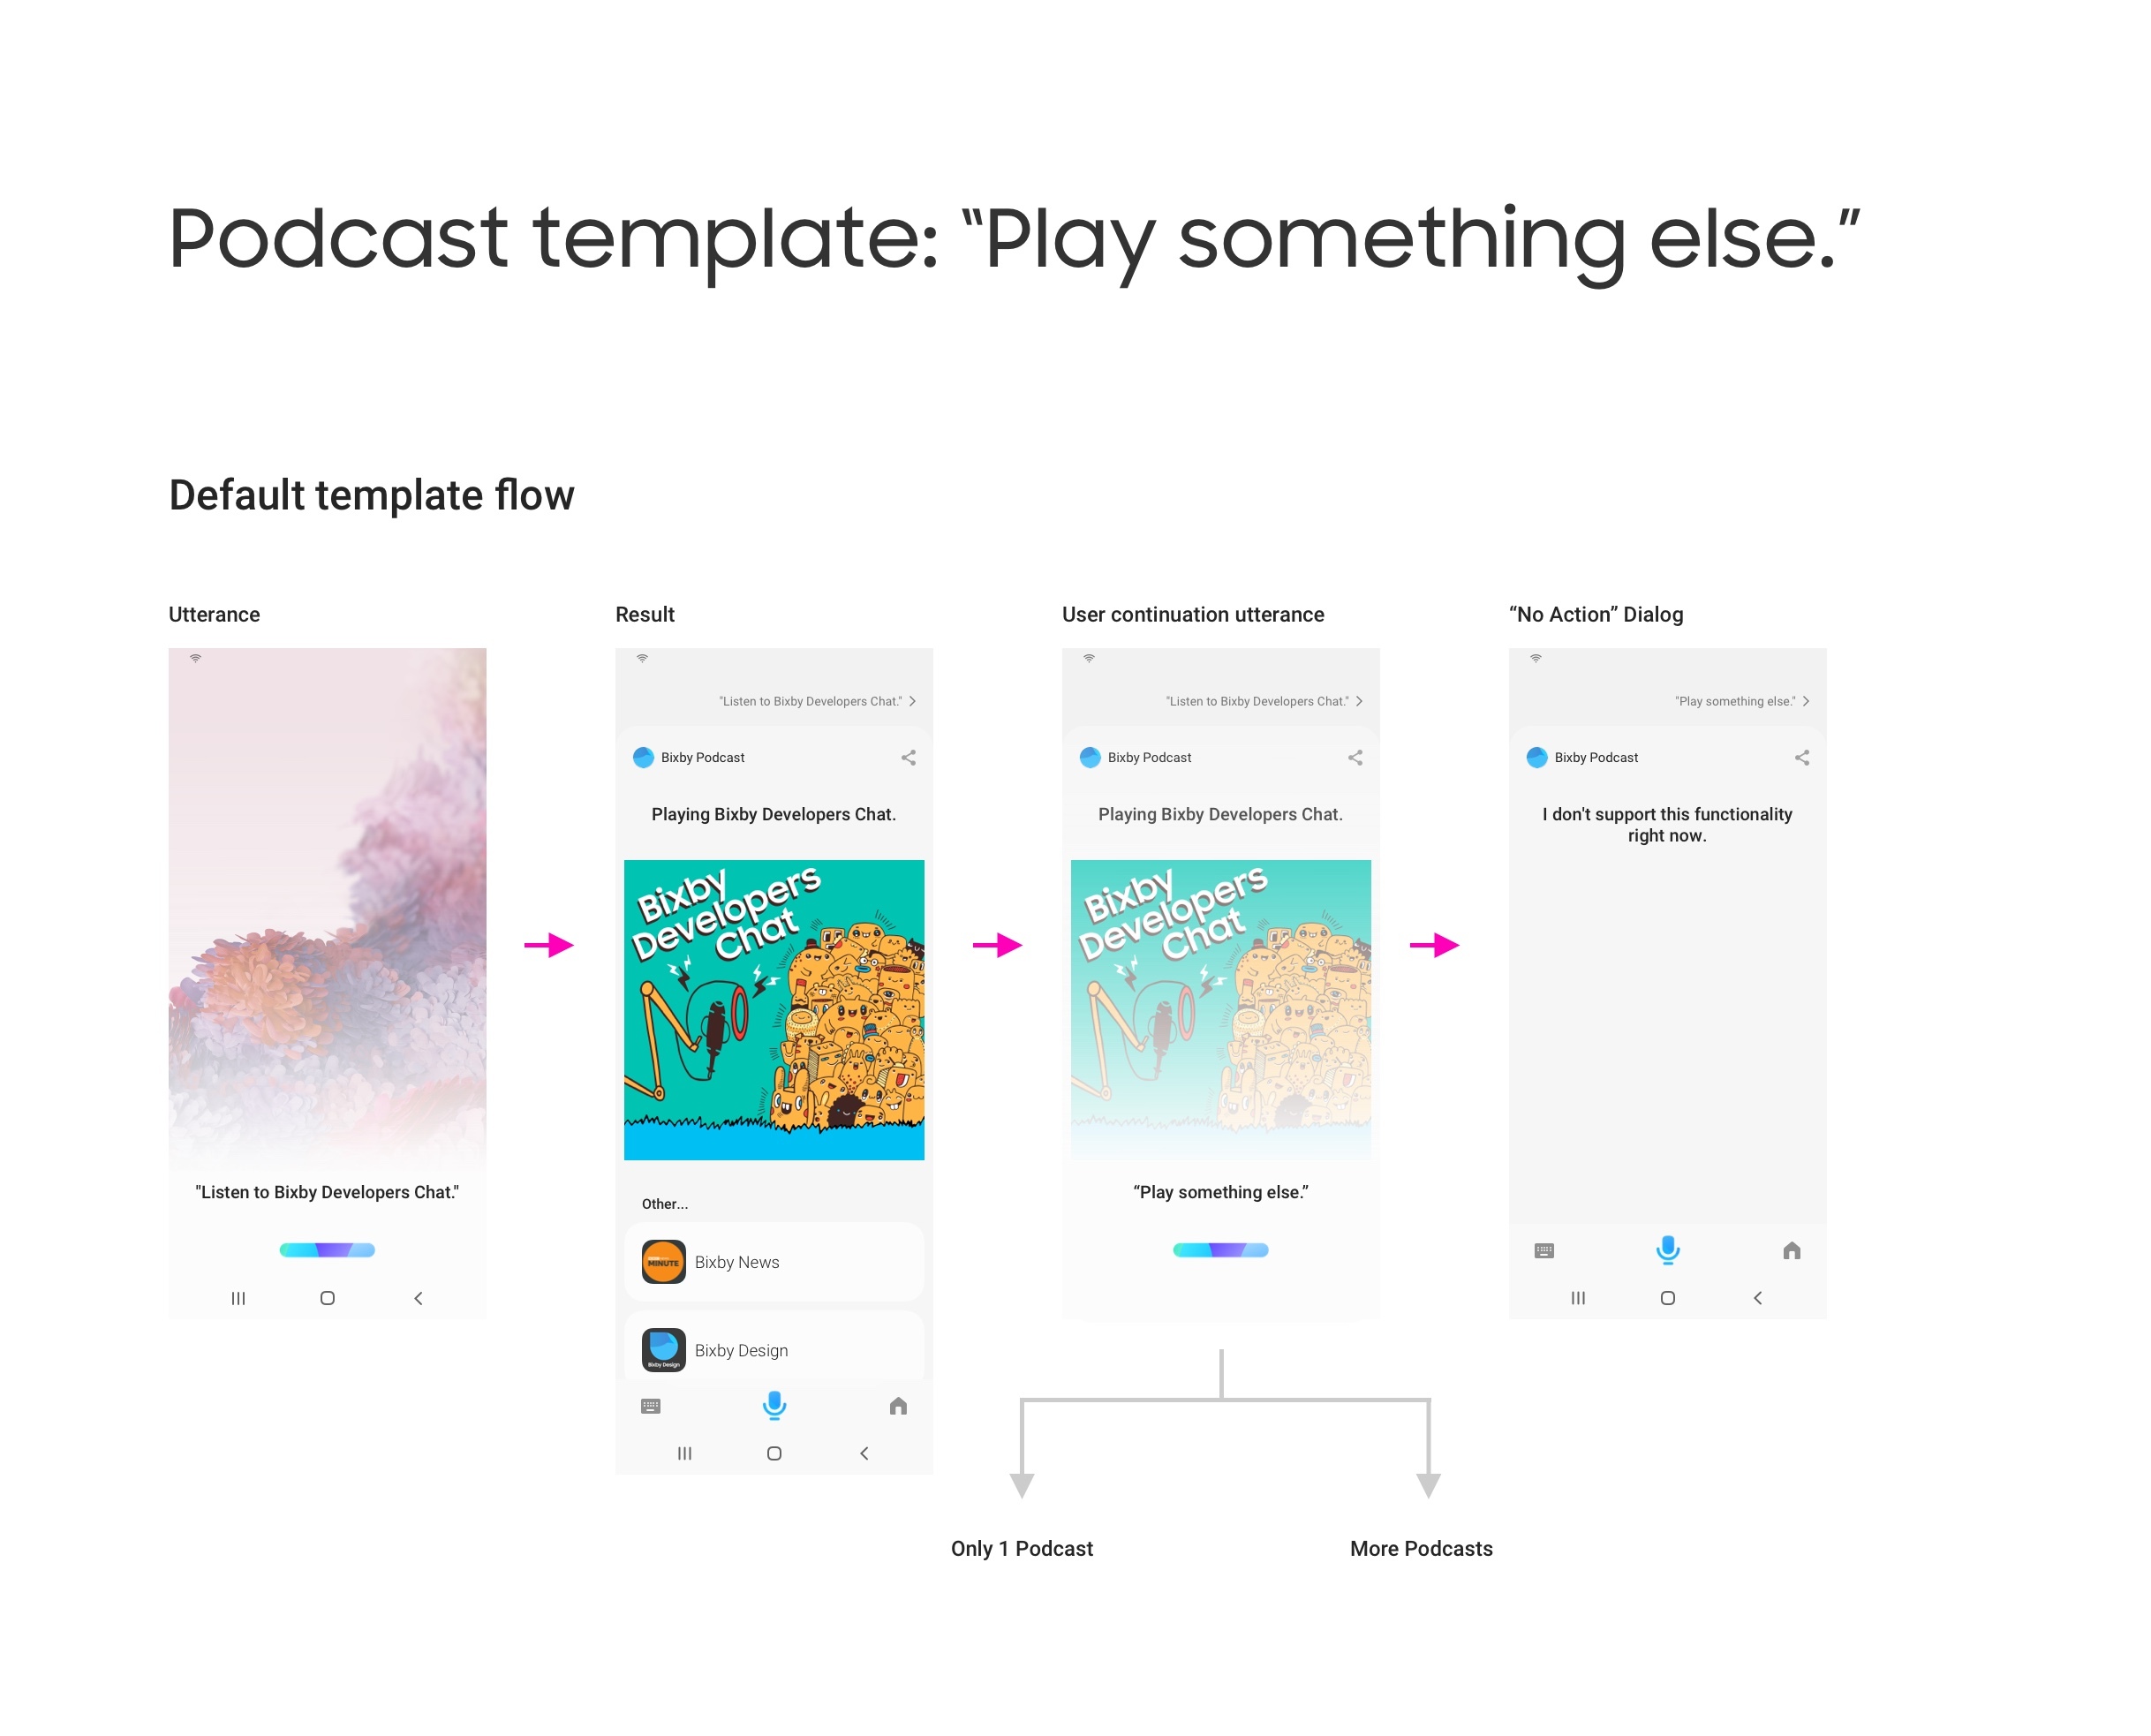 Default flow of podcast template if users ask "play something else"